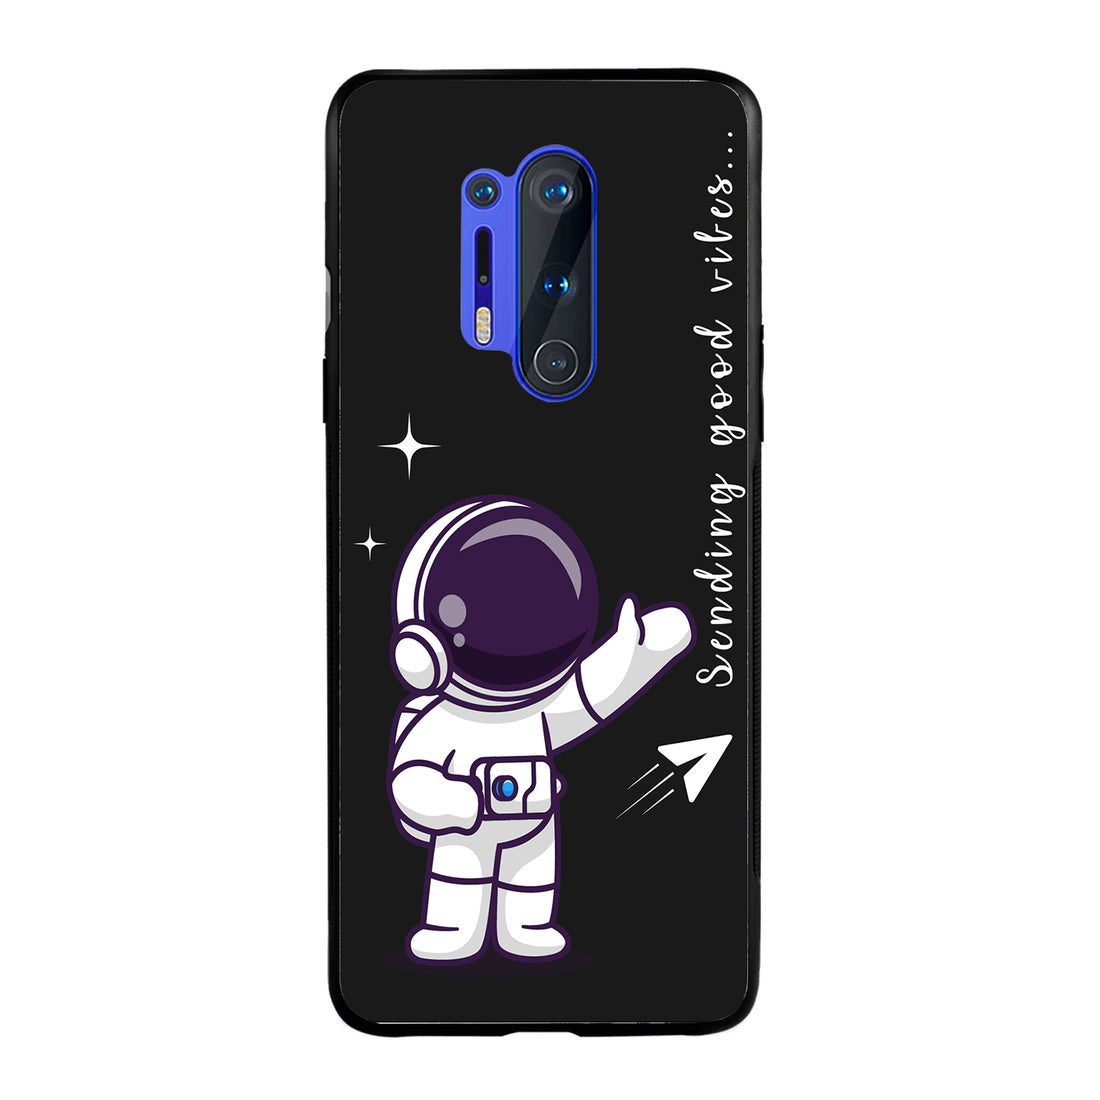 Receiving Good Vibes Bff Oneplus 8 Pro Back Case